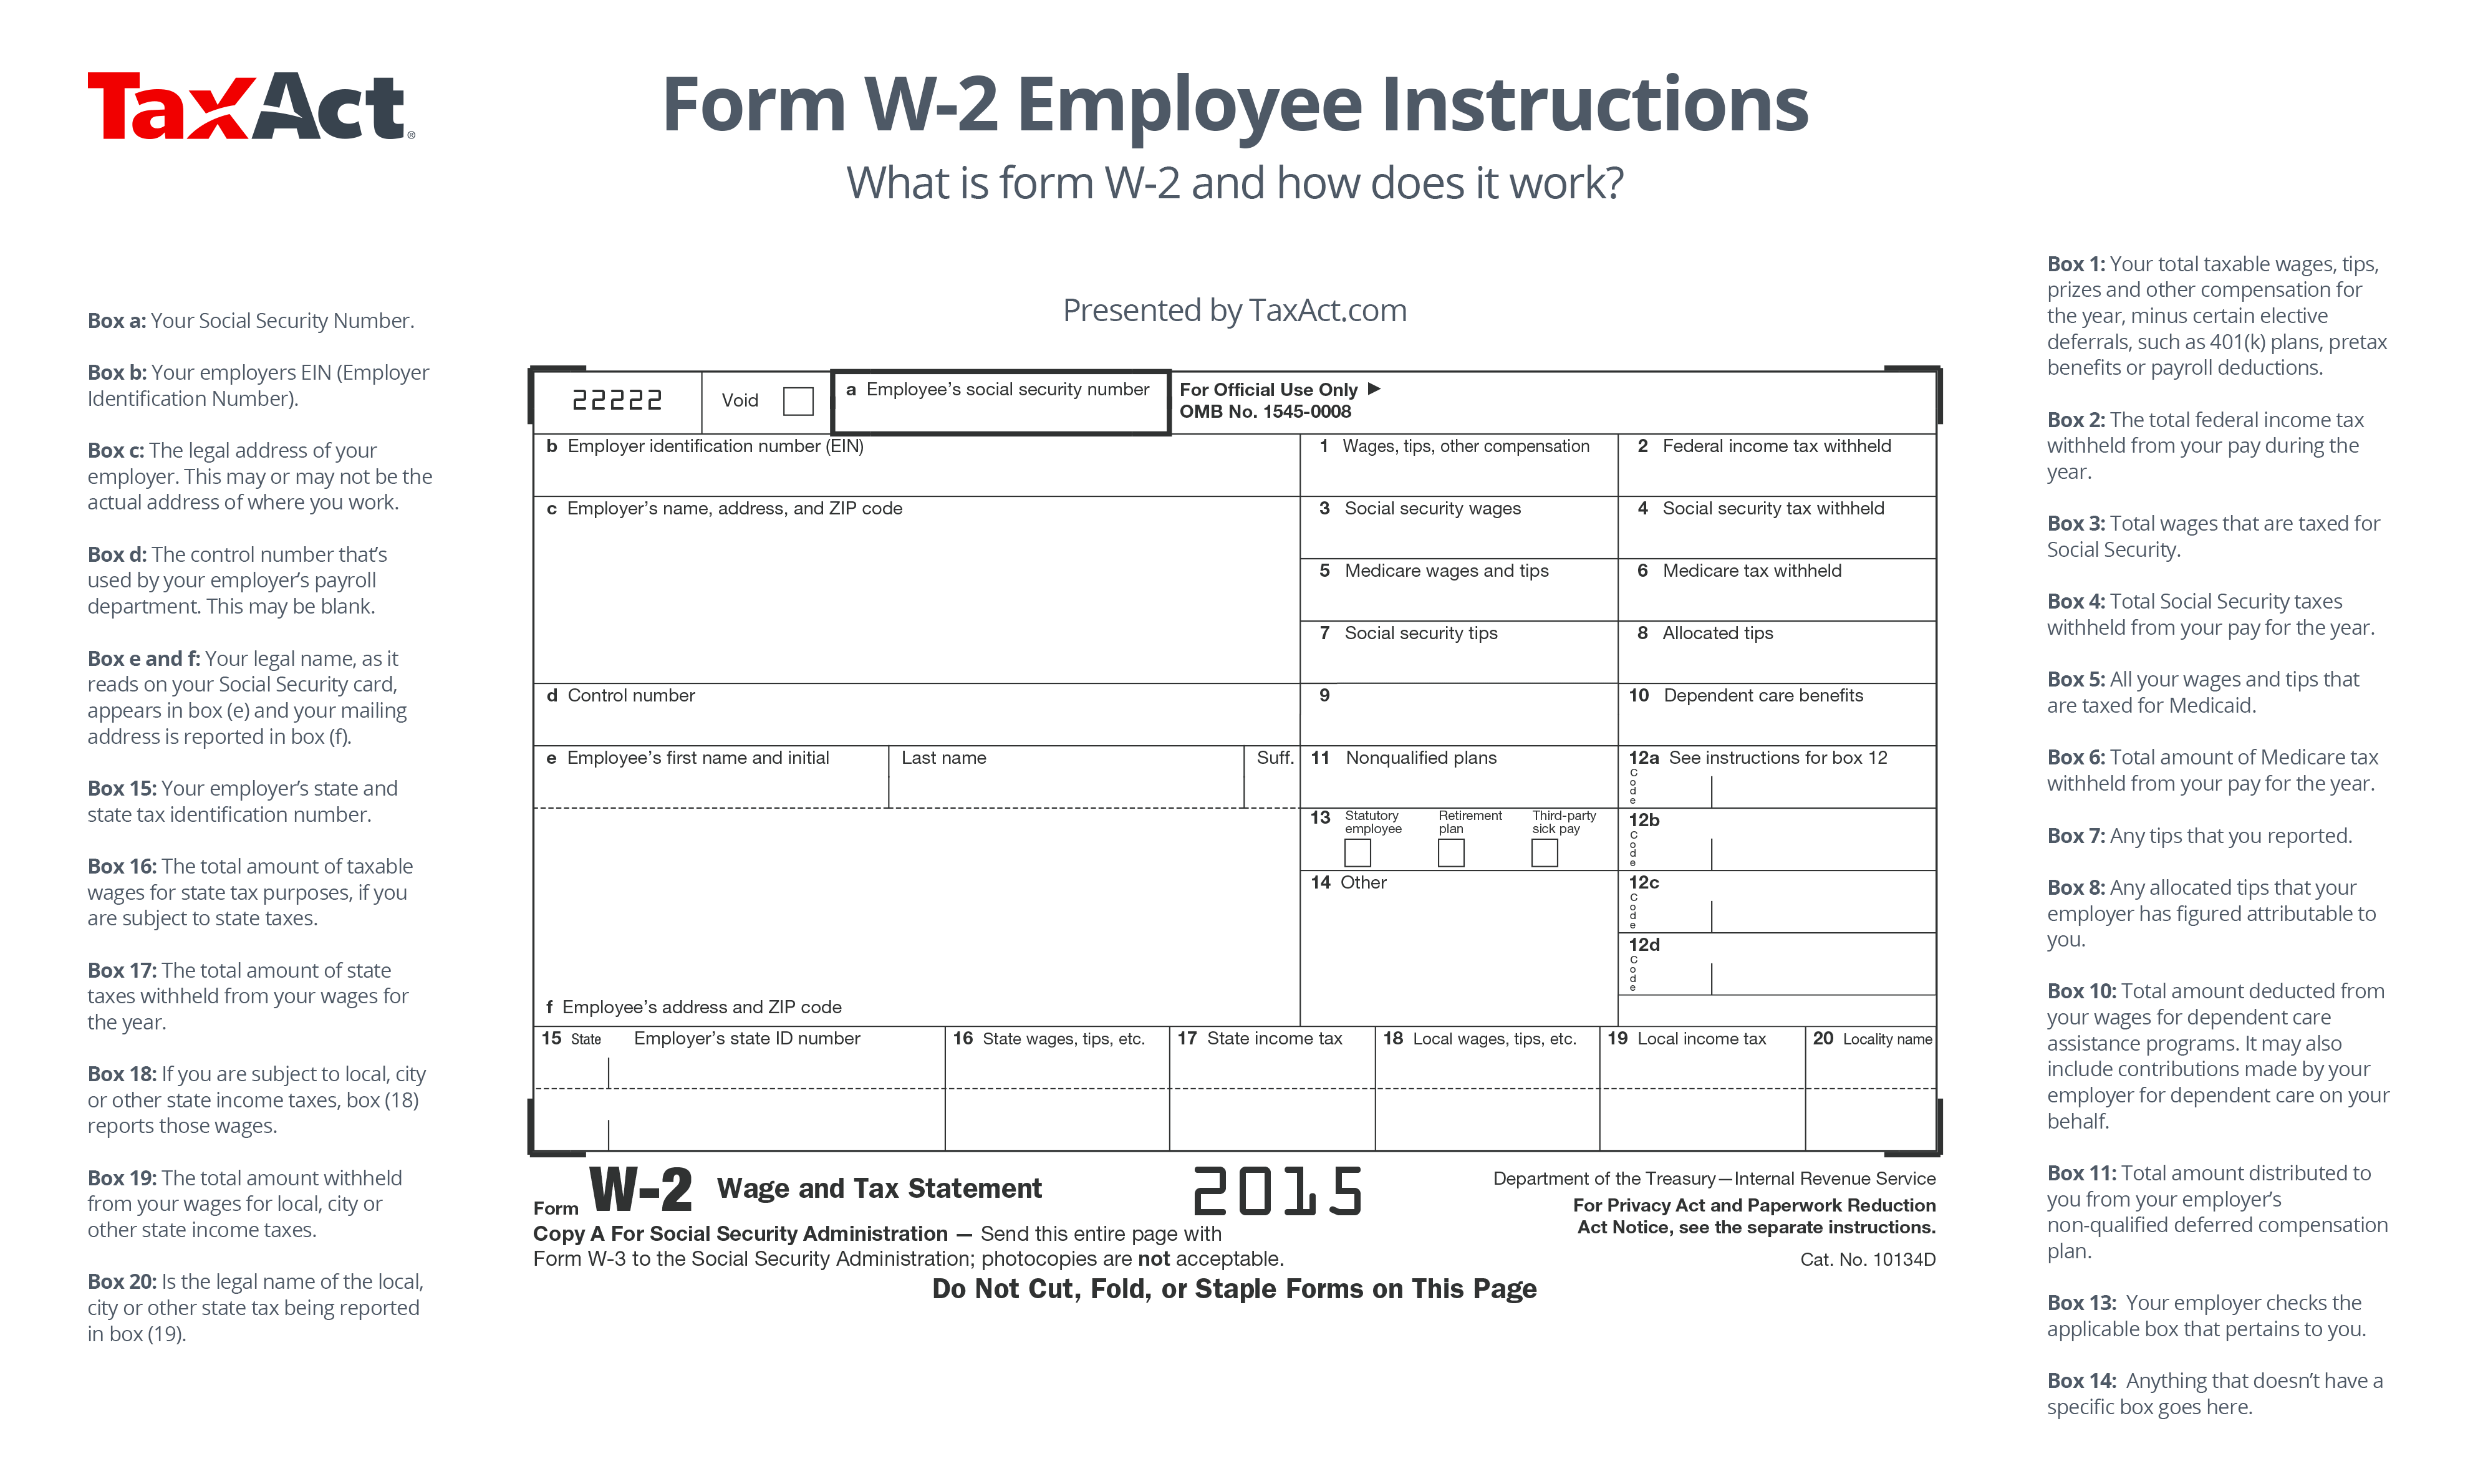 w2 form vs 1040
 What Is W-7 Form and How Does It Work? - TaxAct Blog